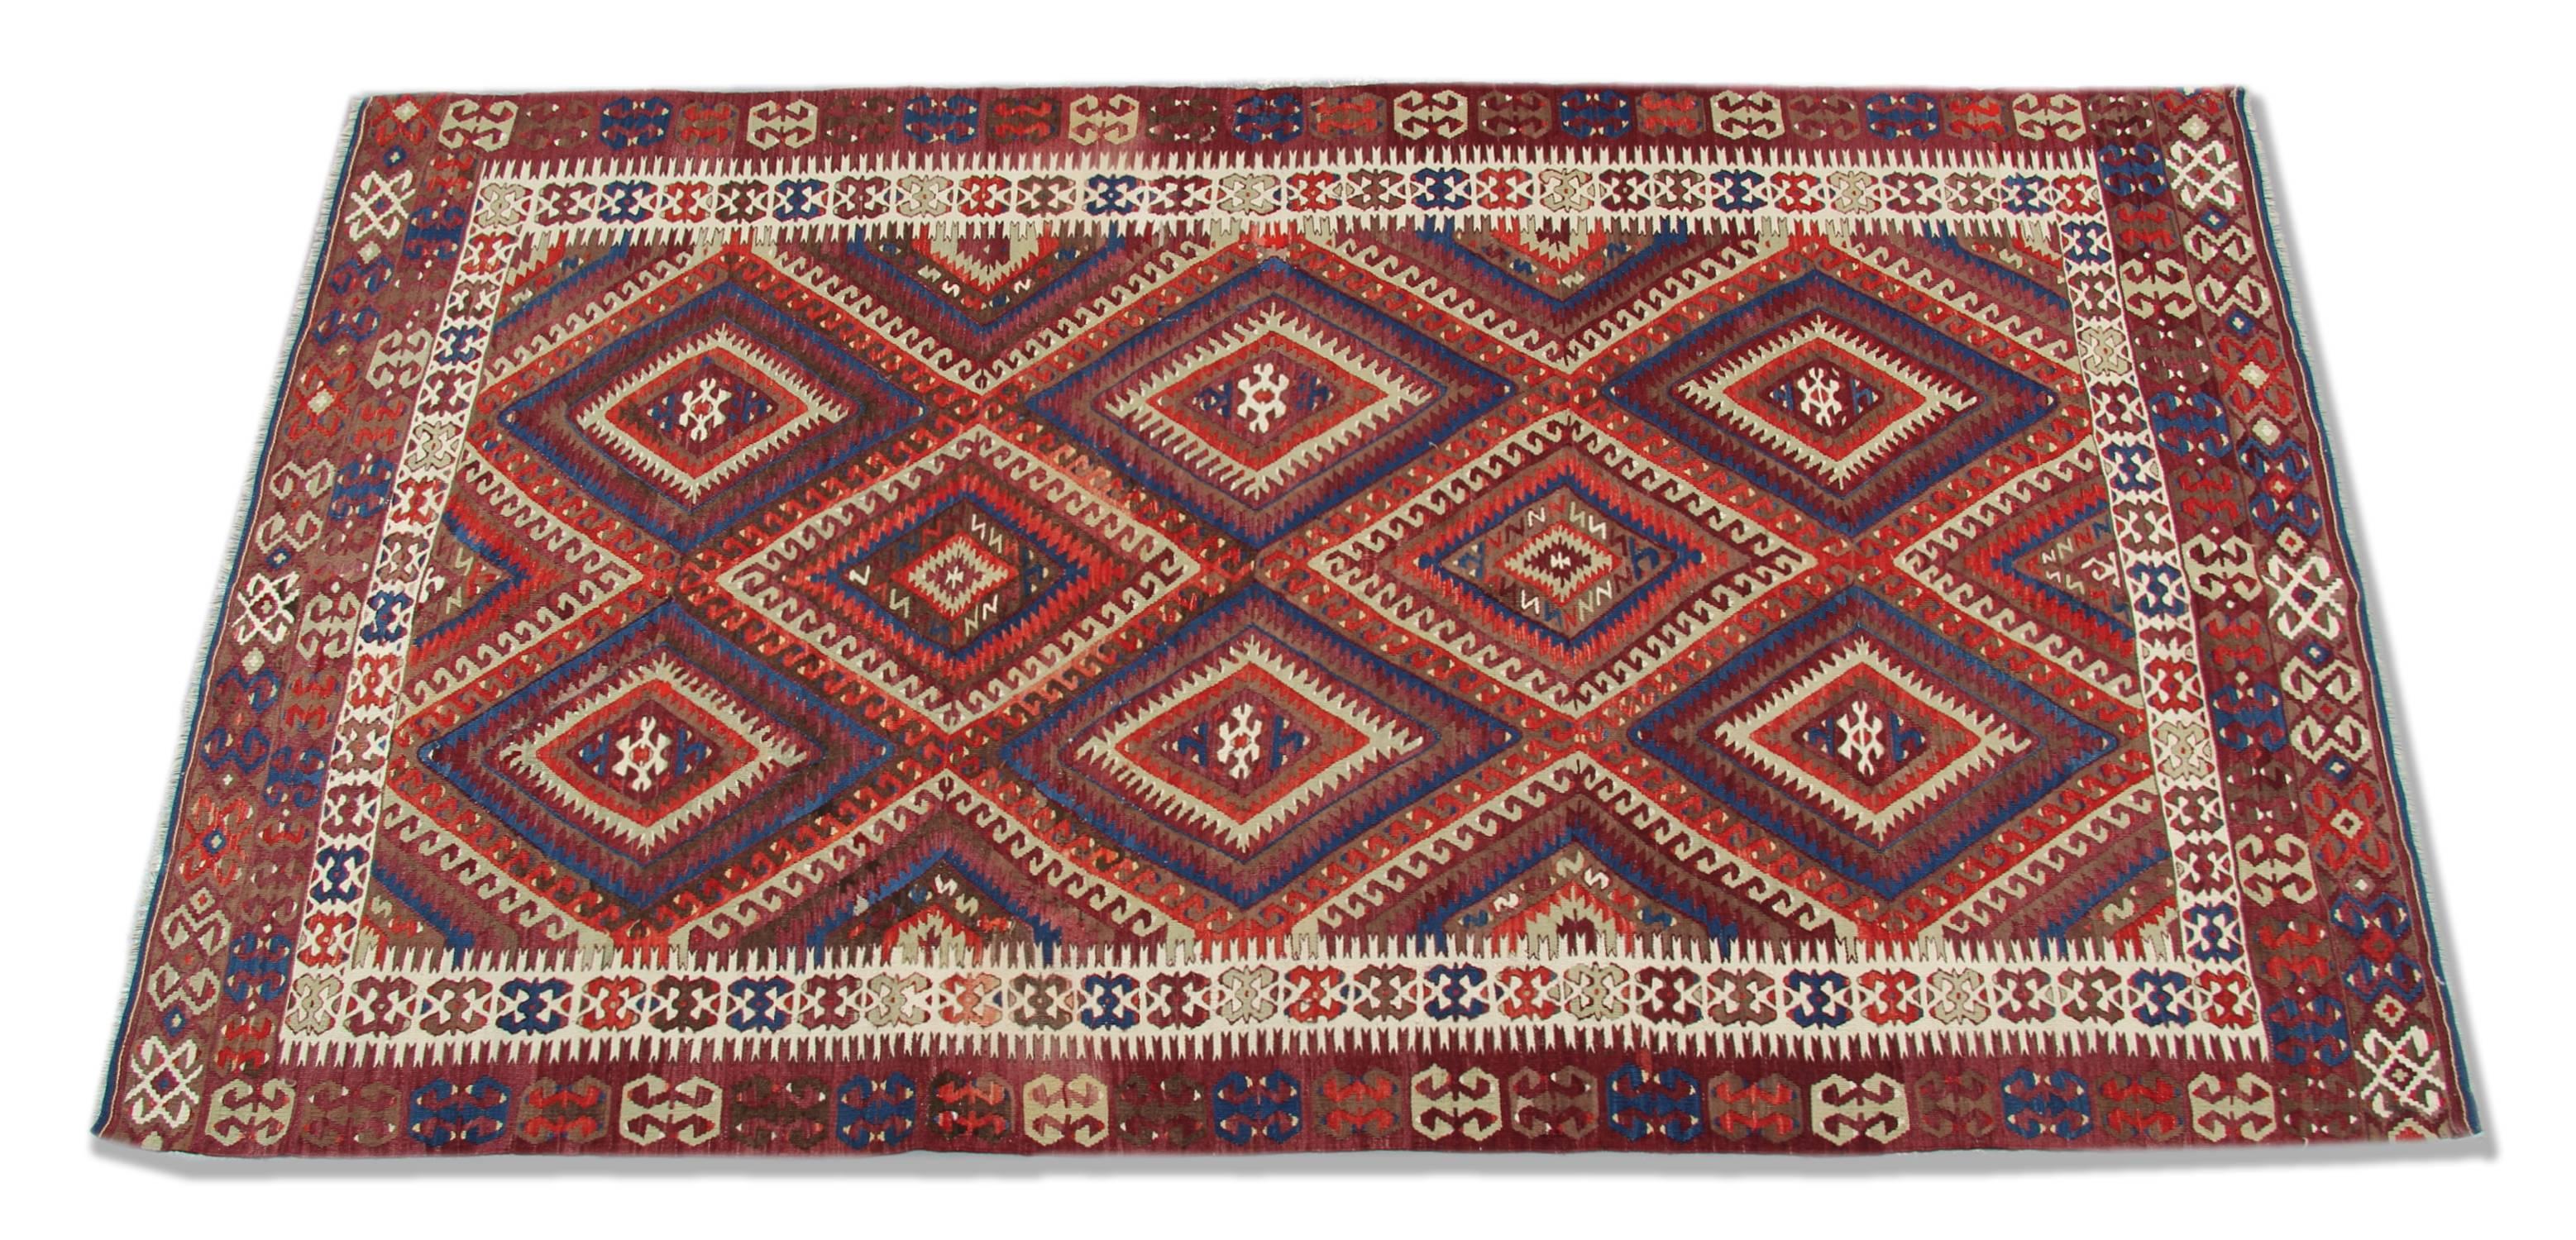 This Red Rug is a Turkish carpet rug has woven by very skilled weavers in Turkey, who used the highest quality wool and cotton. The flat-weave rug has dark & light red, ivory, blue, white, cream and dark brown colors. The red and blue background of